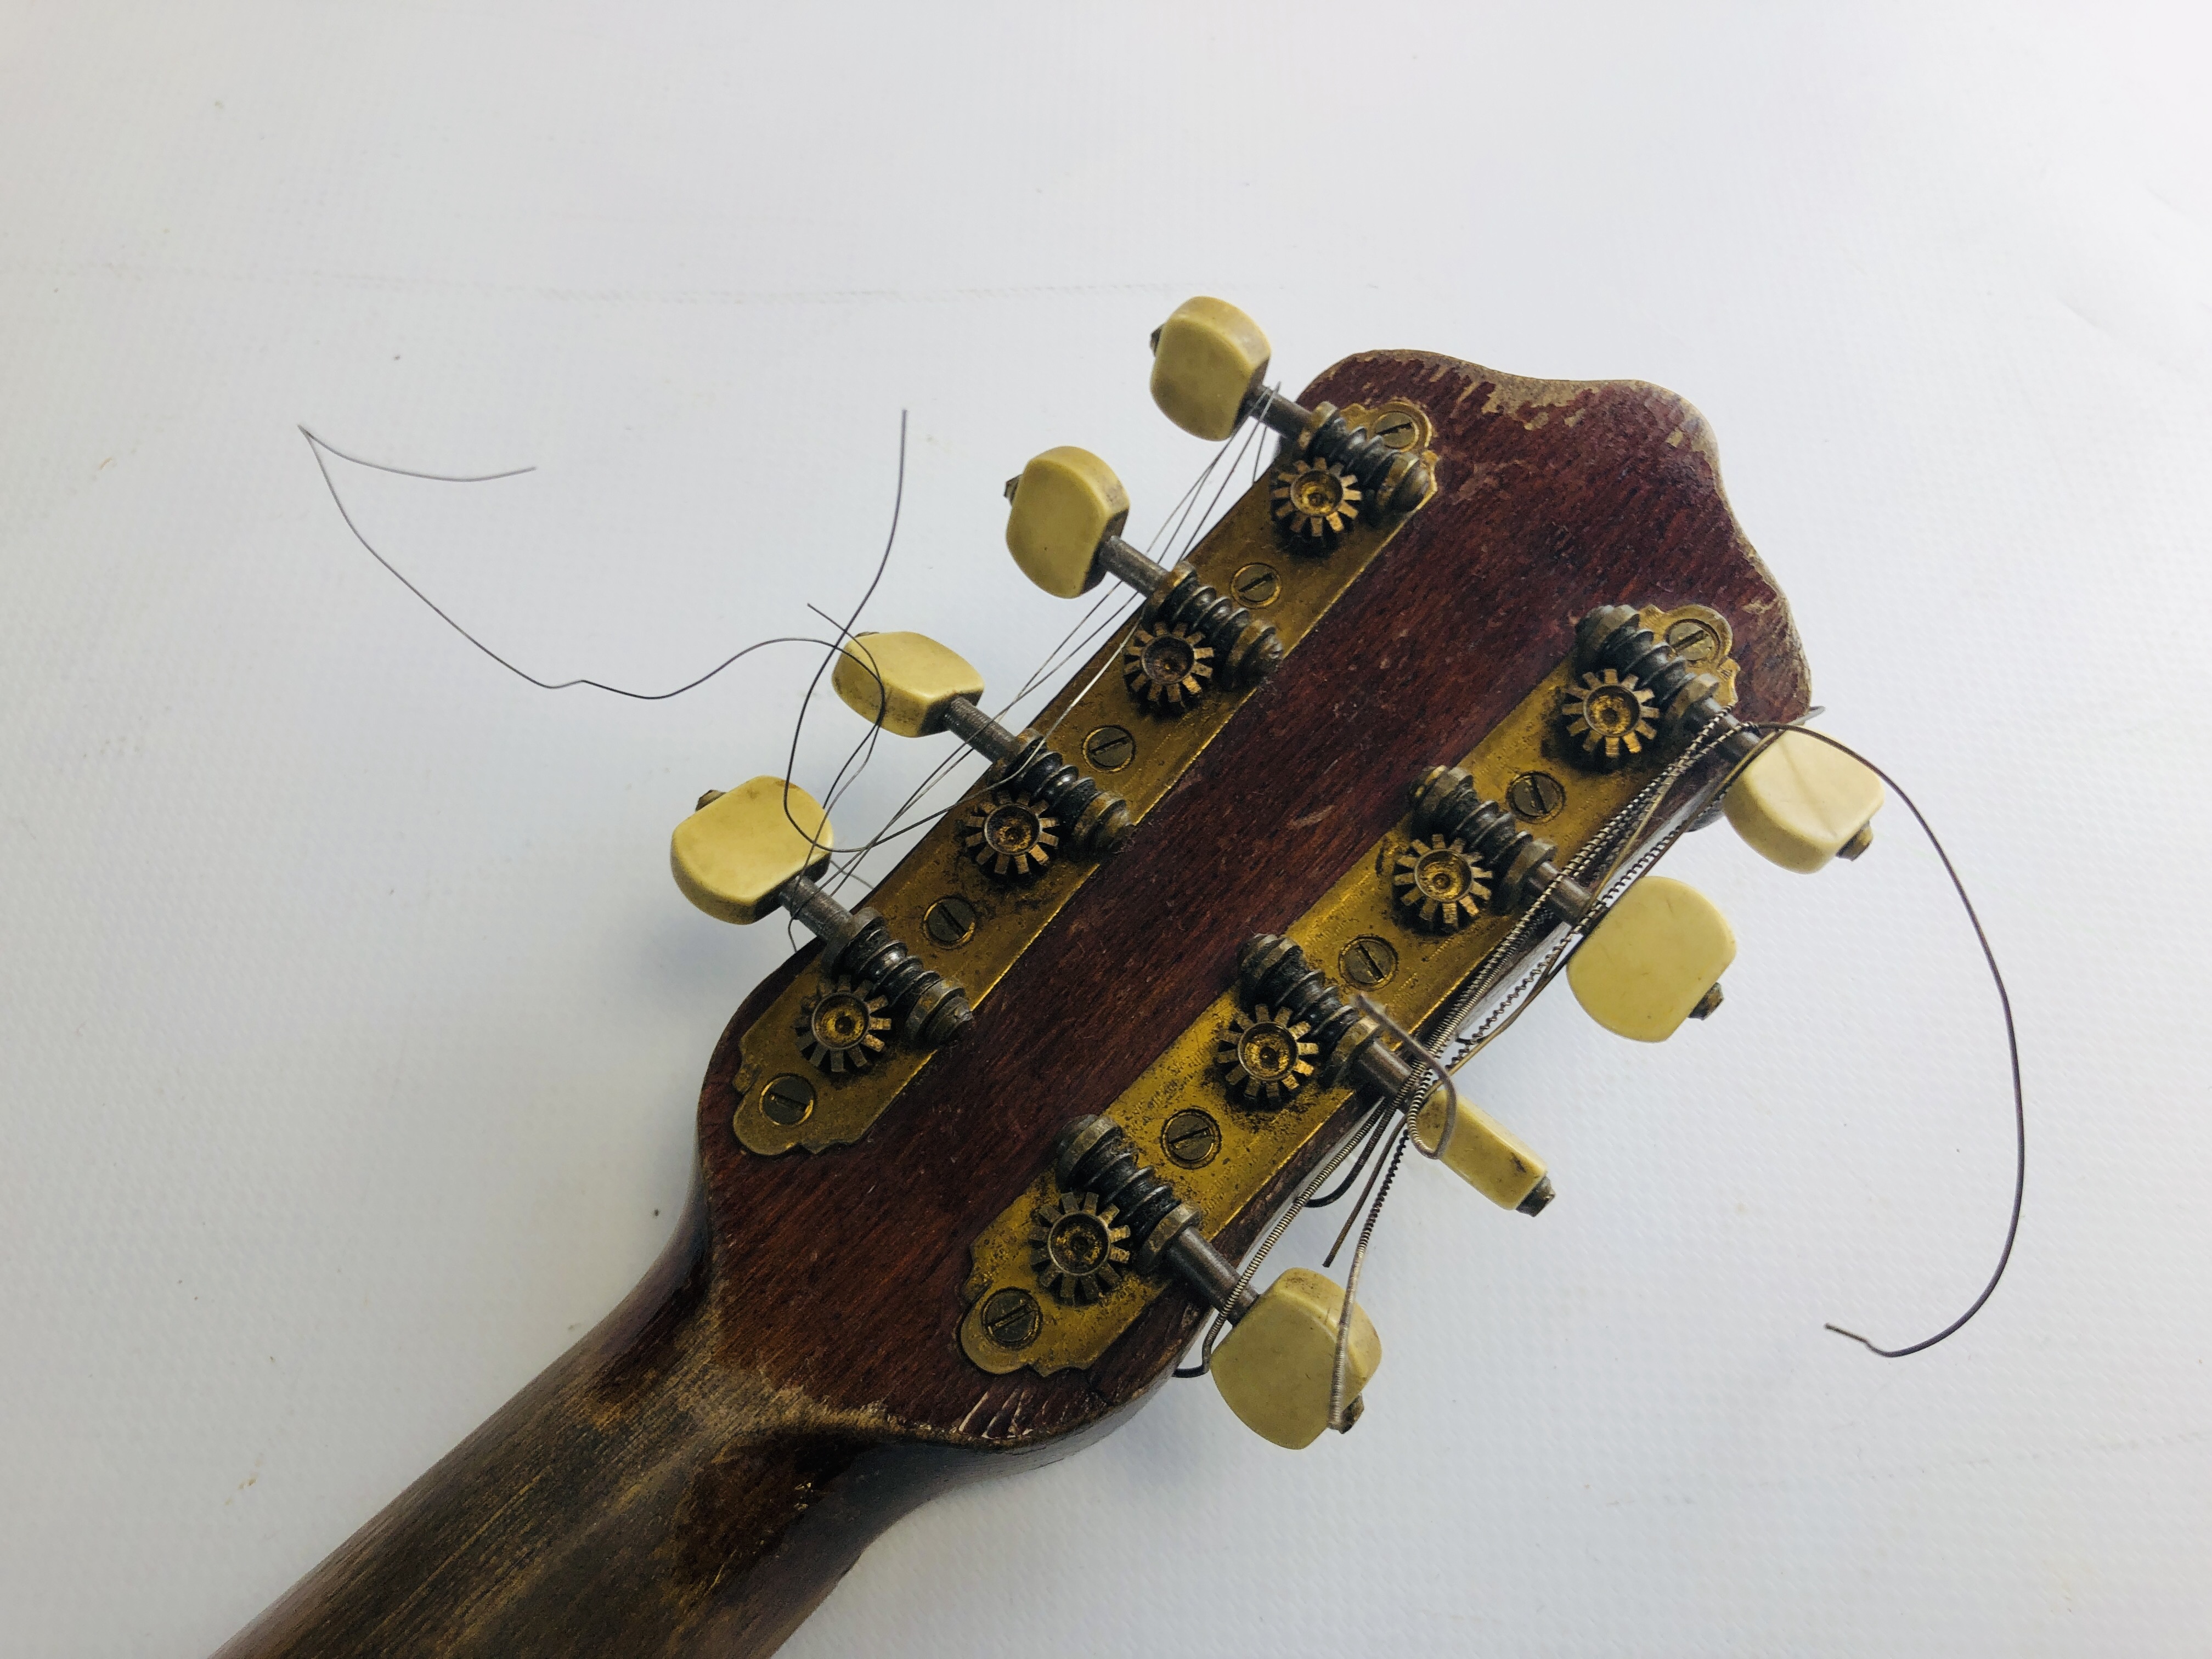 AN ANTIQUE MANDOLIN MARKED BELL-TONE PAT APPLD FOR "SBANA" REGD. IN FITTED CASE - L 60CM. - Image 5 of 9